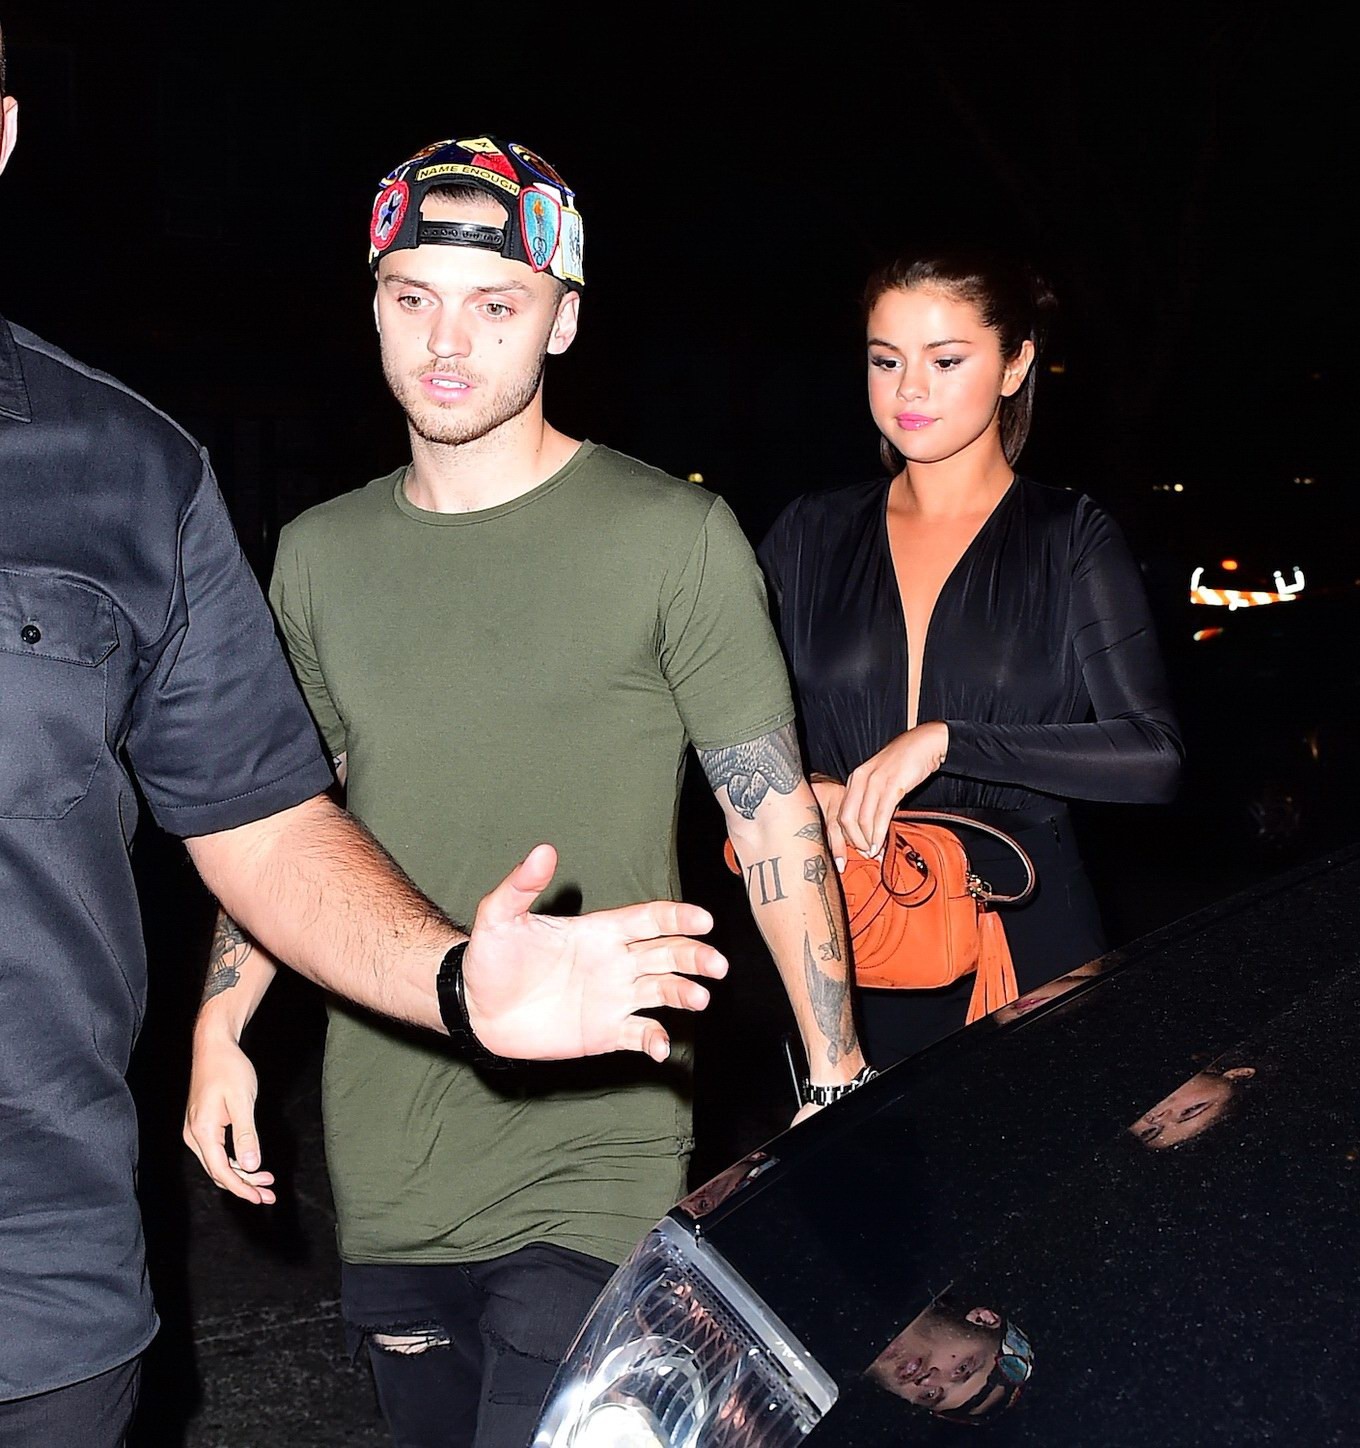 Selena Gomez braless wearing a wide open shirt on a night out #75160586